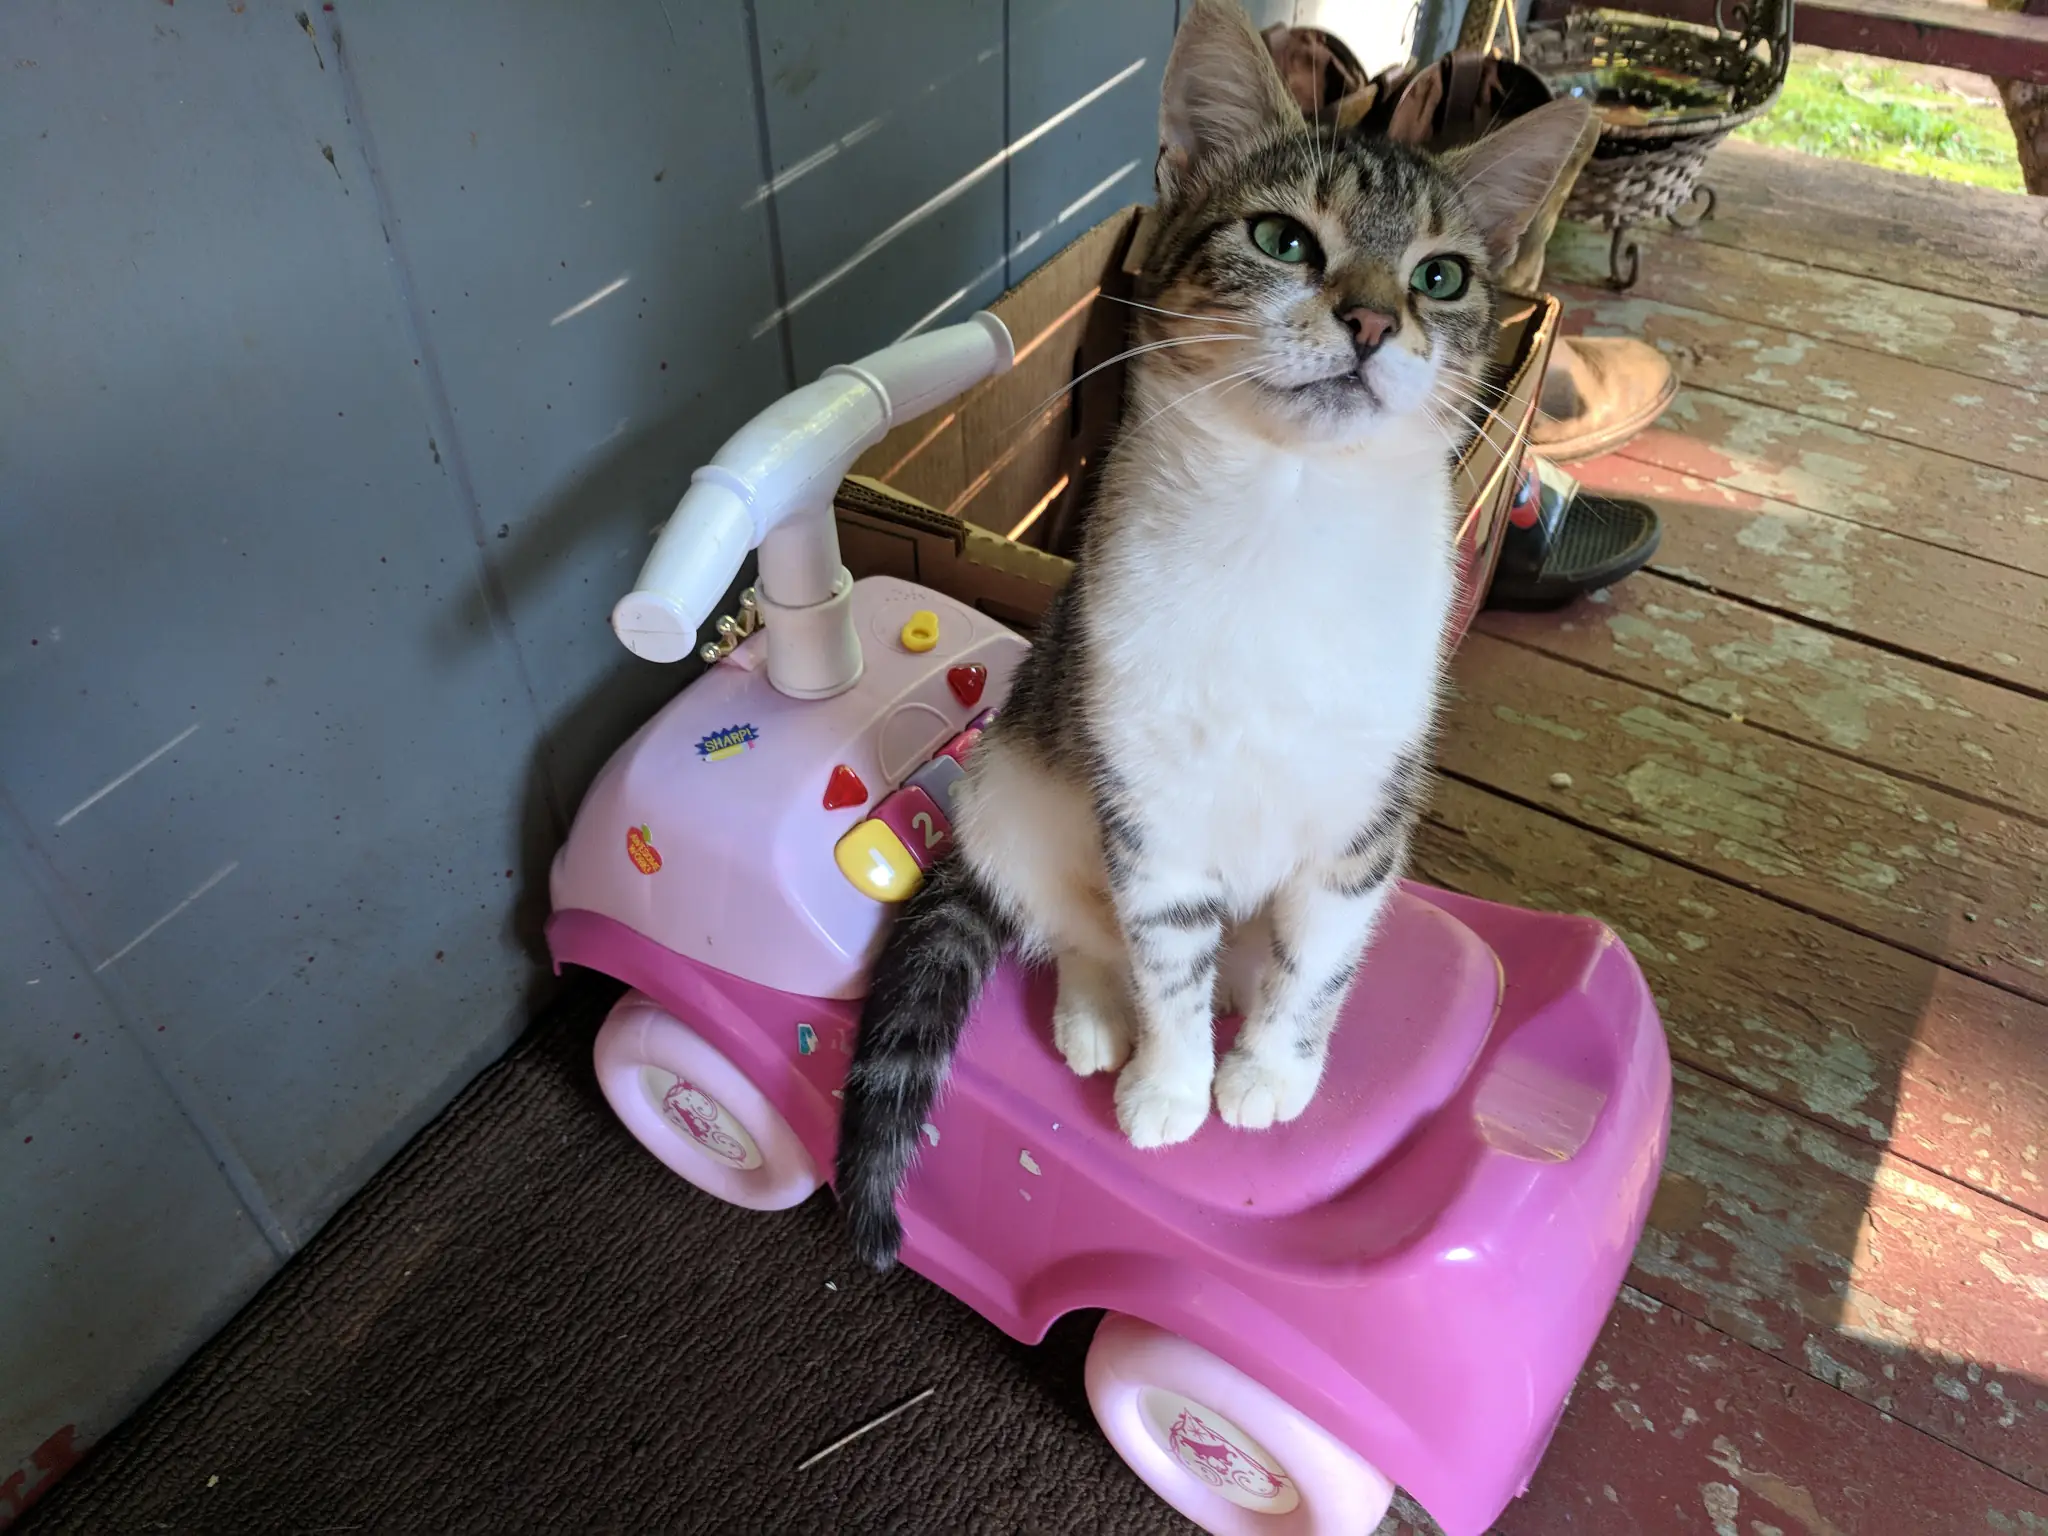 Cat sitting on a pink toy car.